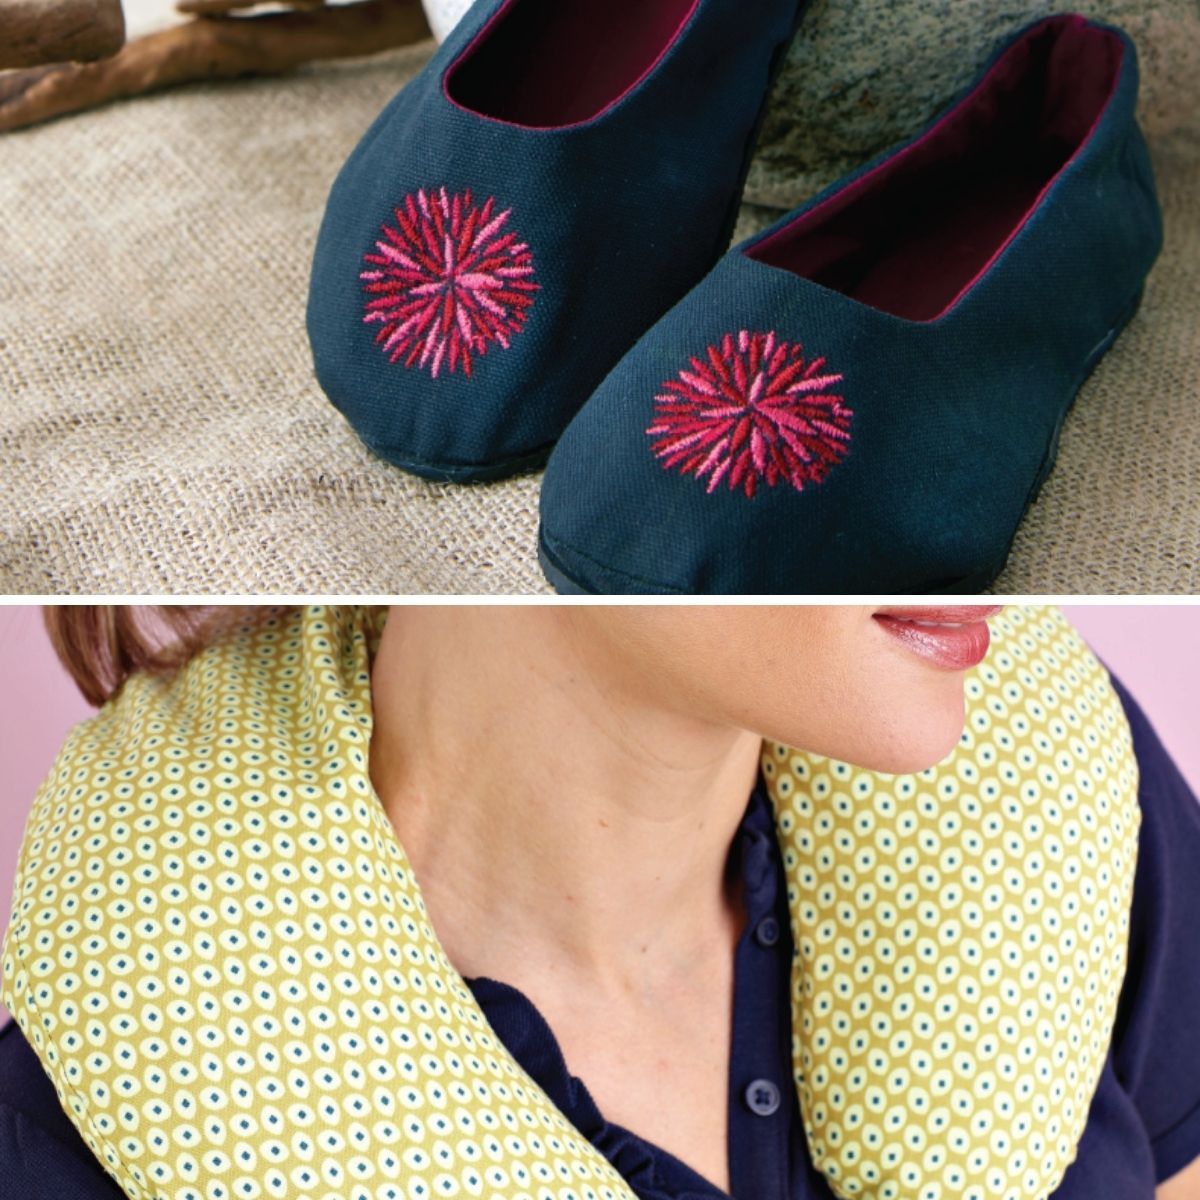 Sew up some slippers and a neck pillow for comfy travels.